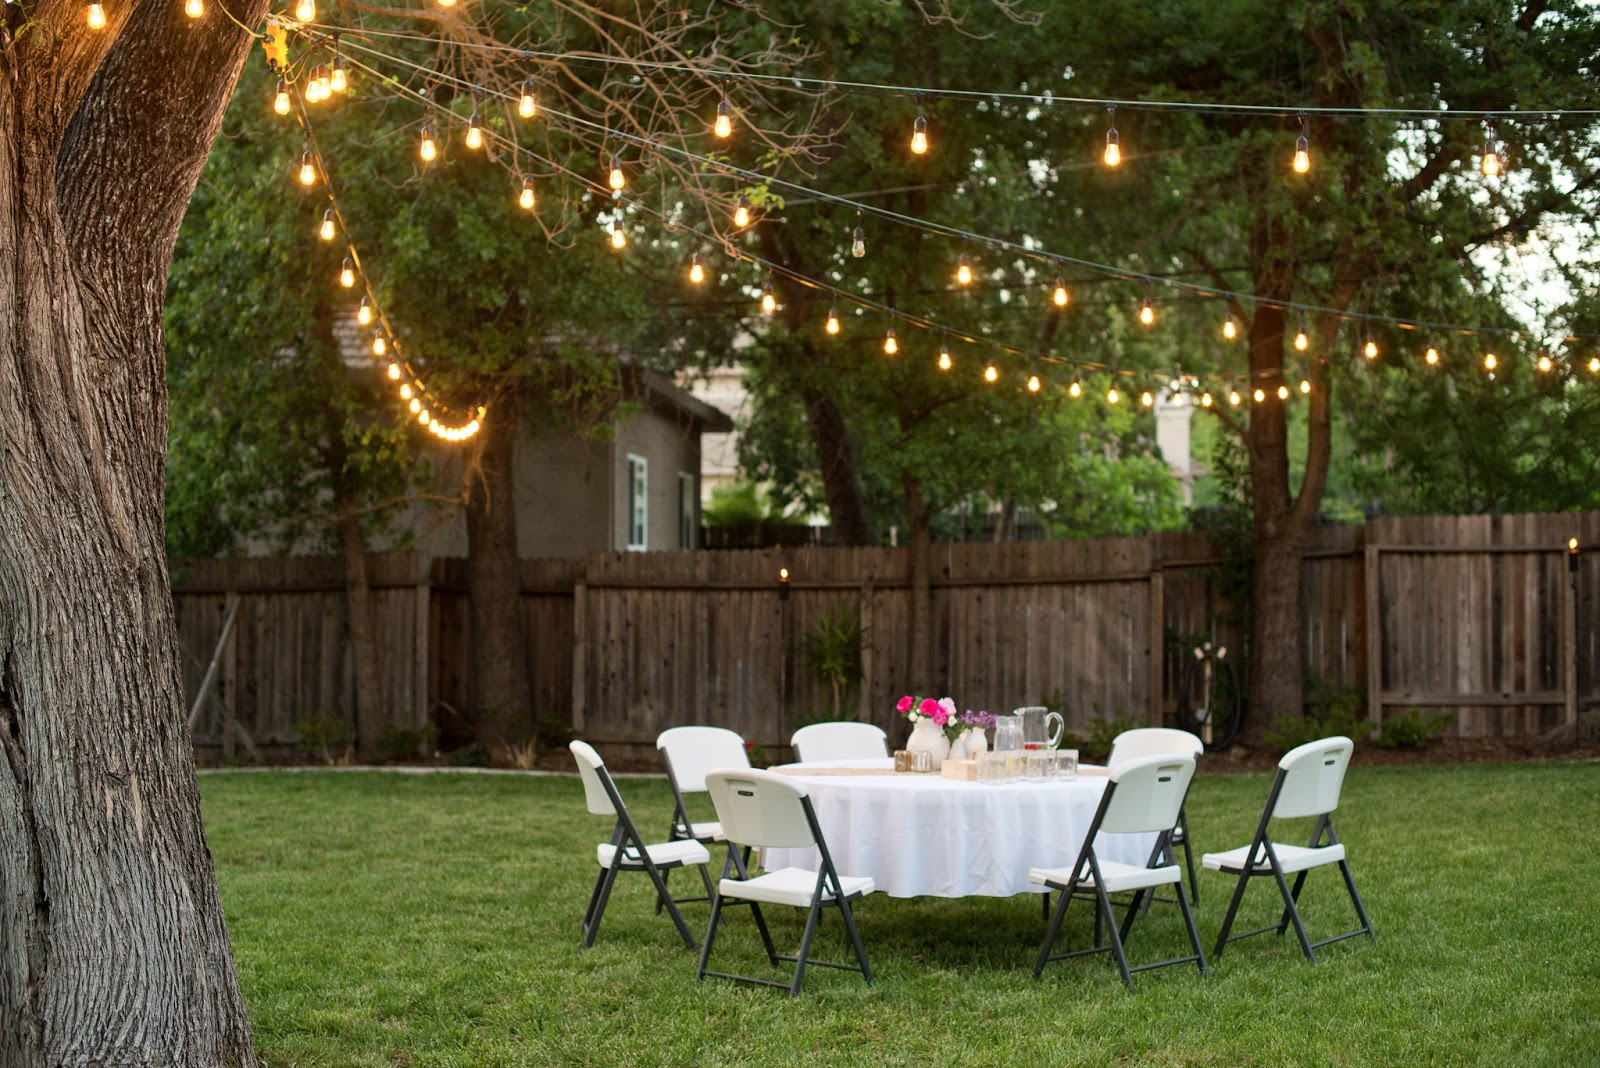 Backyard Boogie Party Ideas
 Backyard Party Ideas For Adults Image — Design & Ideas